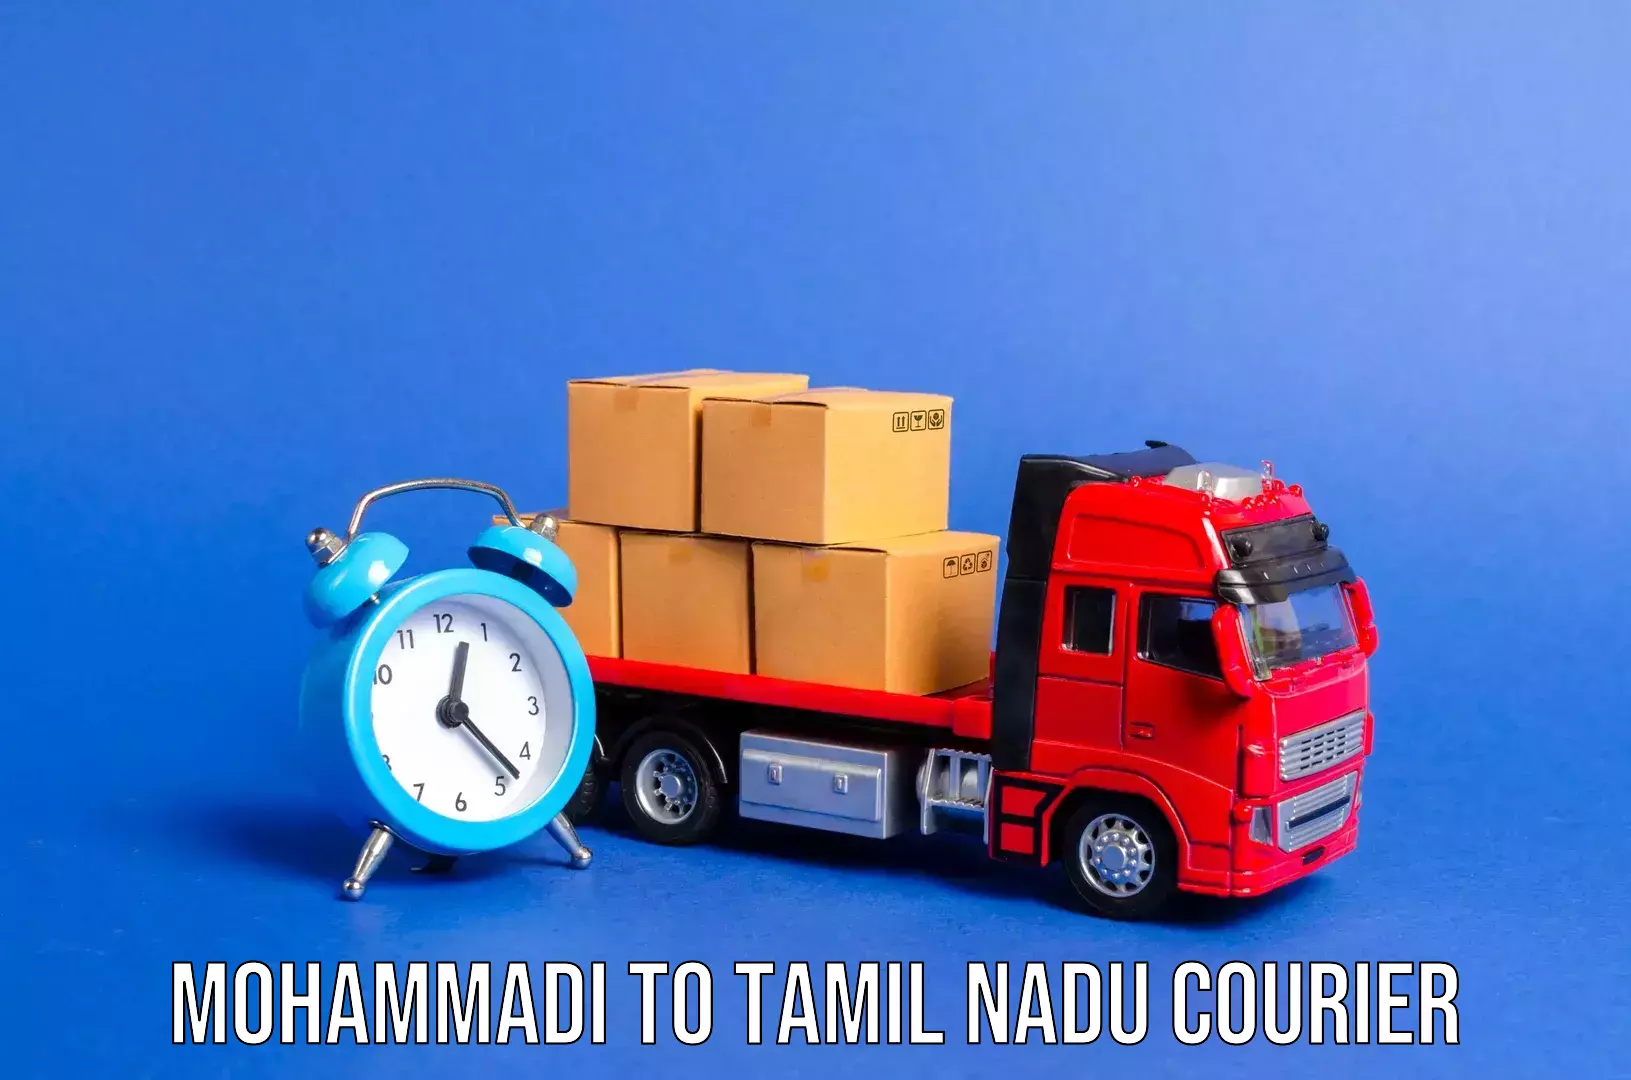 Luggage transport consulting in Mohammadi to Tamil Nadu